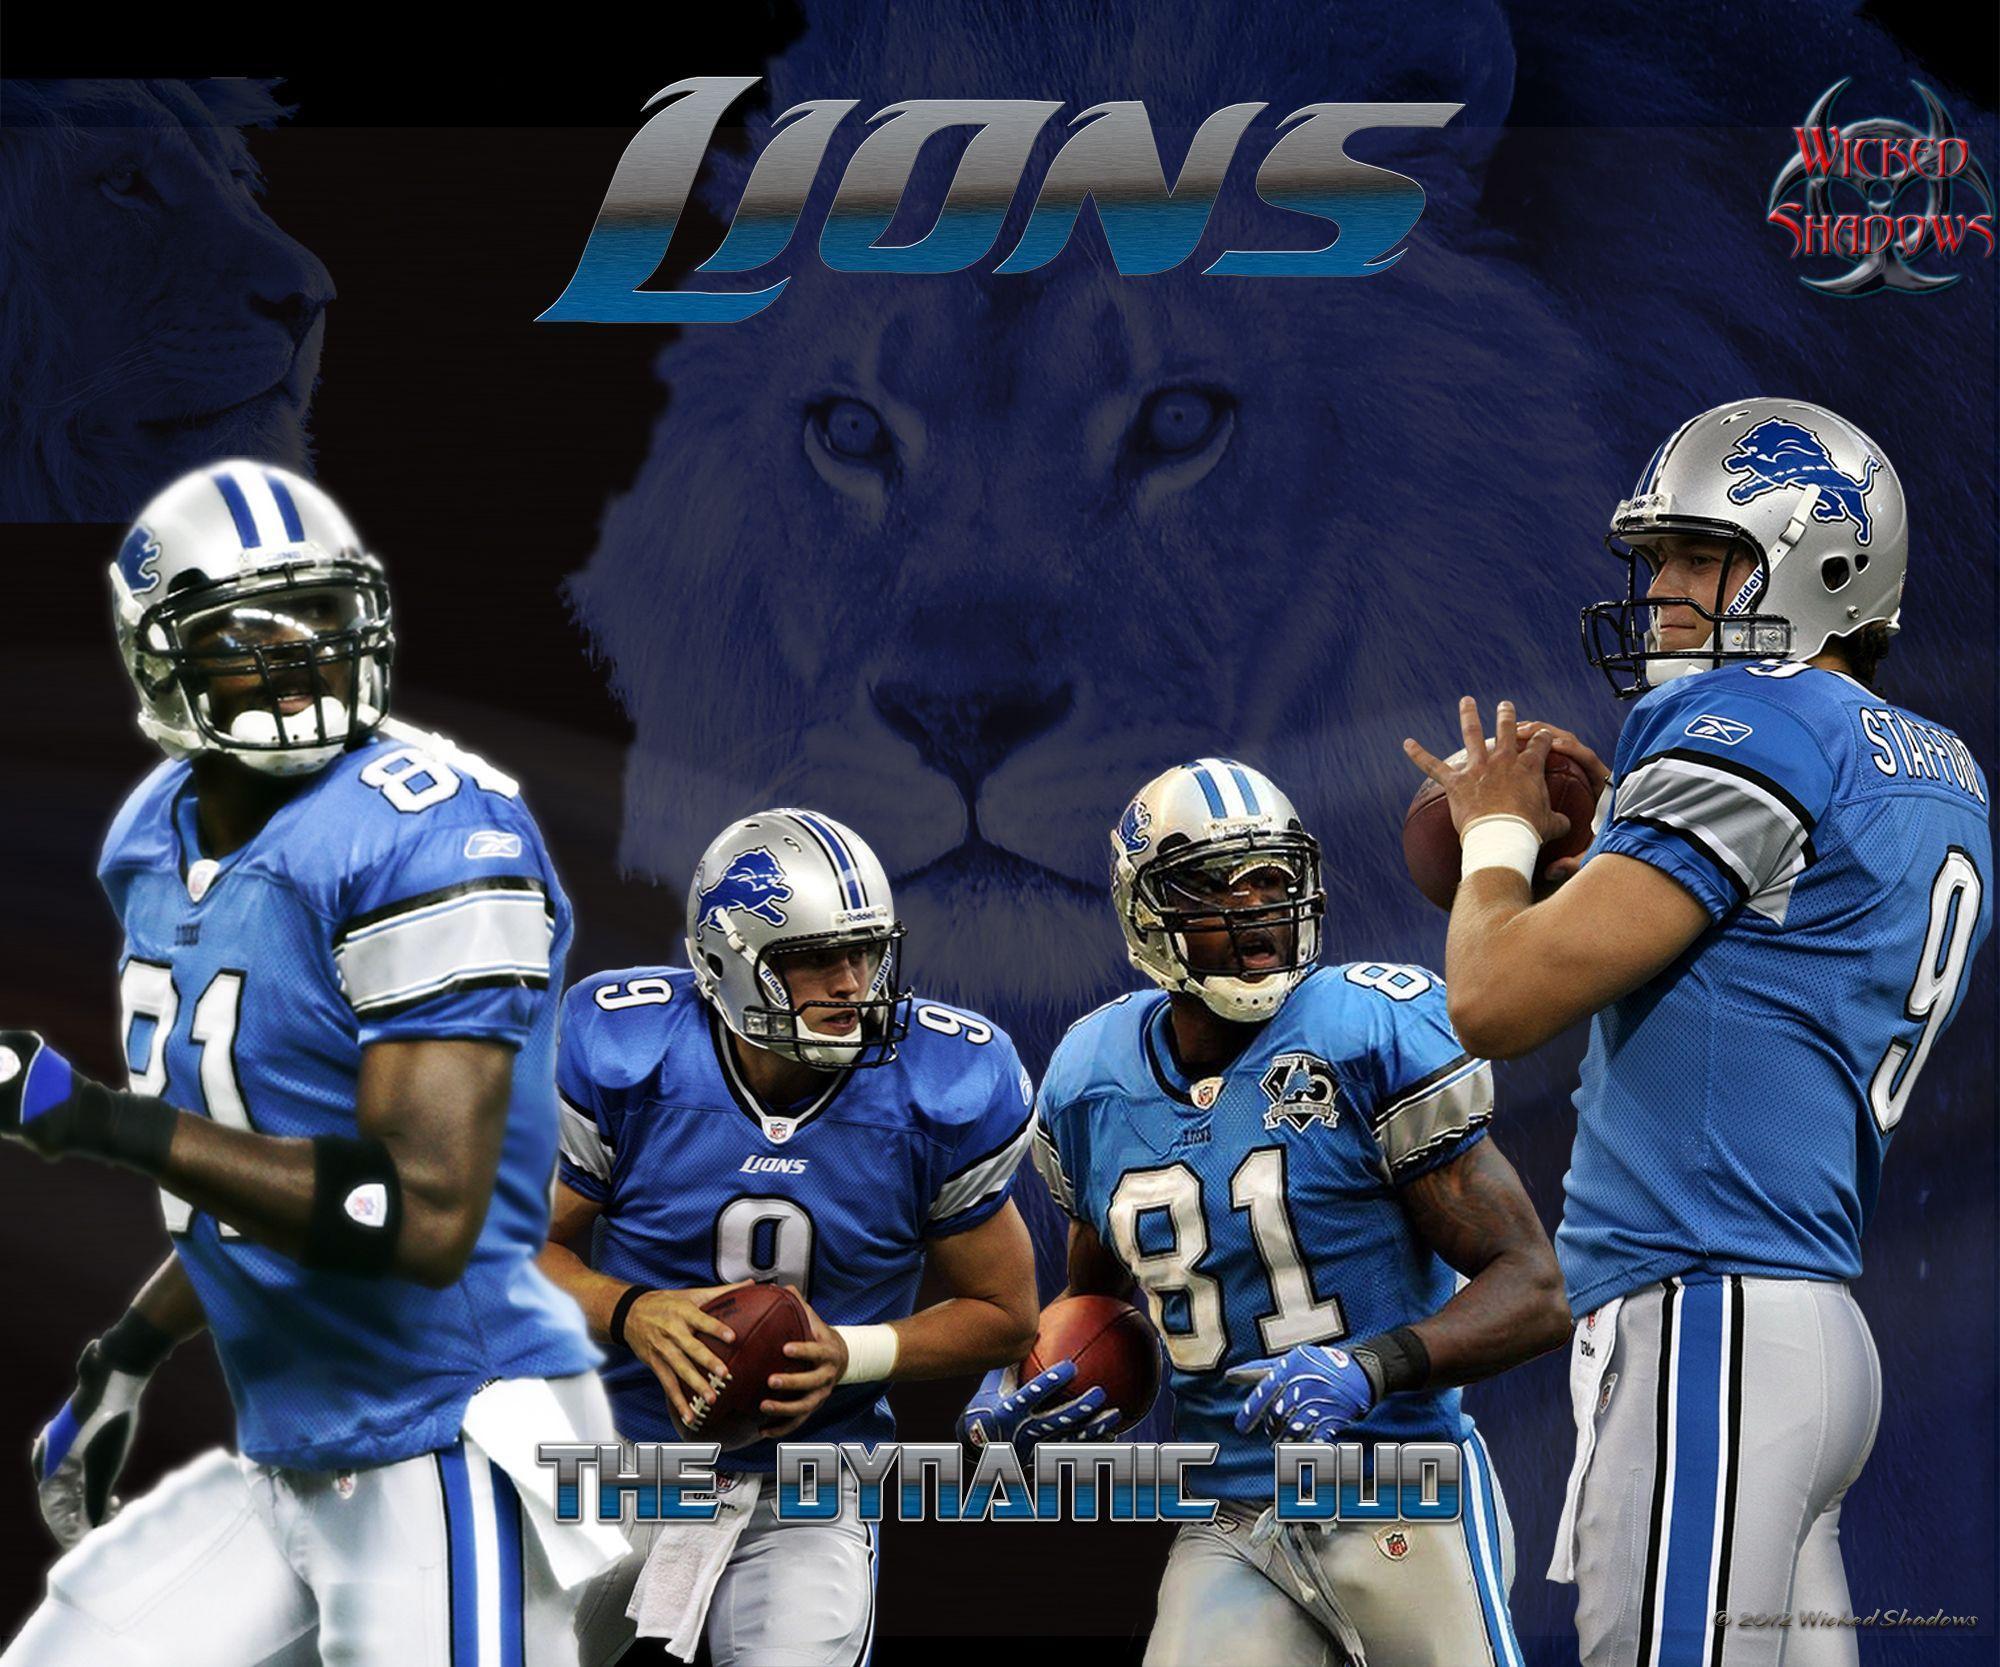 Wallpaper By Wicked Shadows: Calvin Johnson and Matthew Stafford